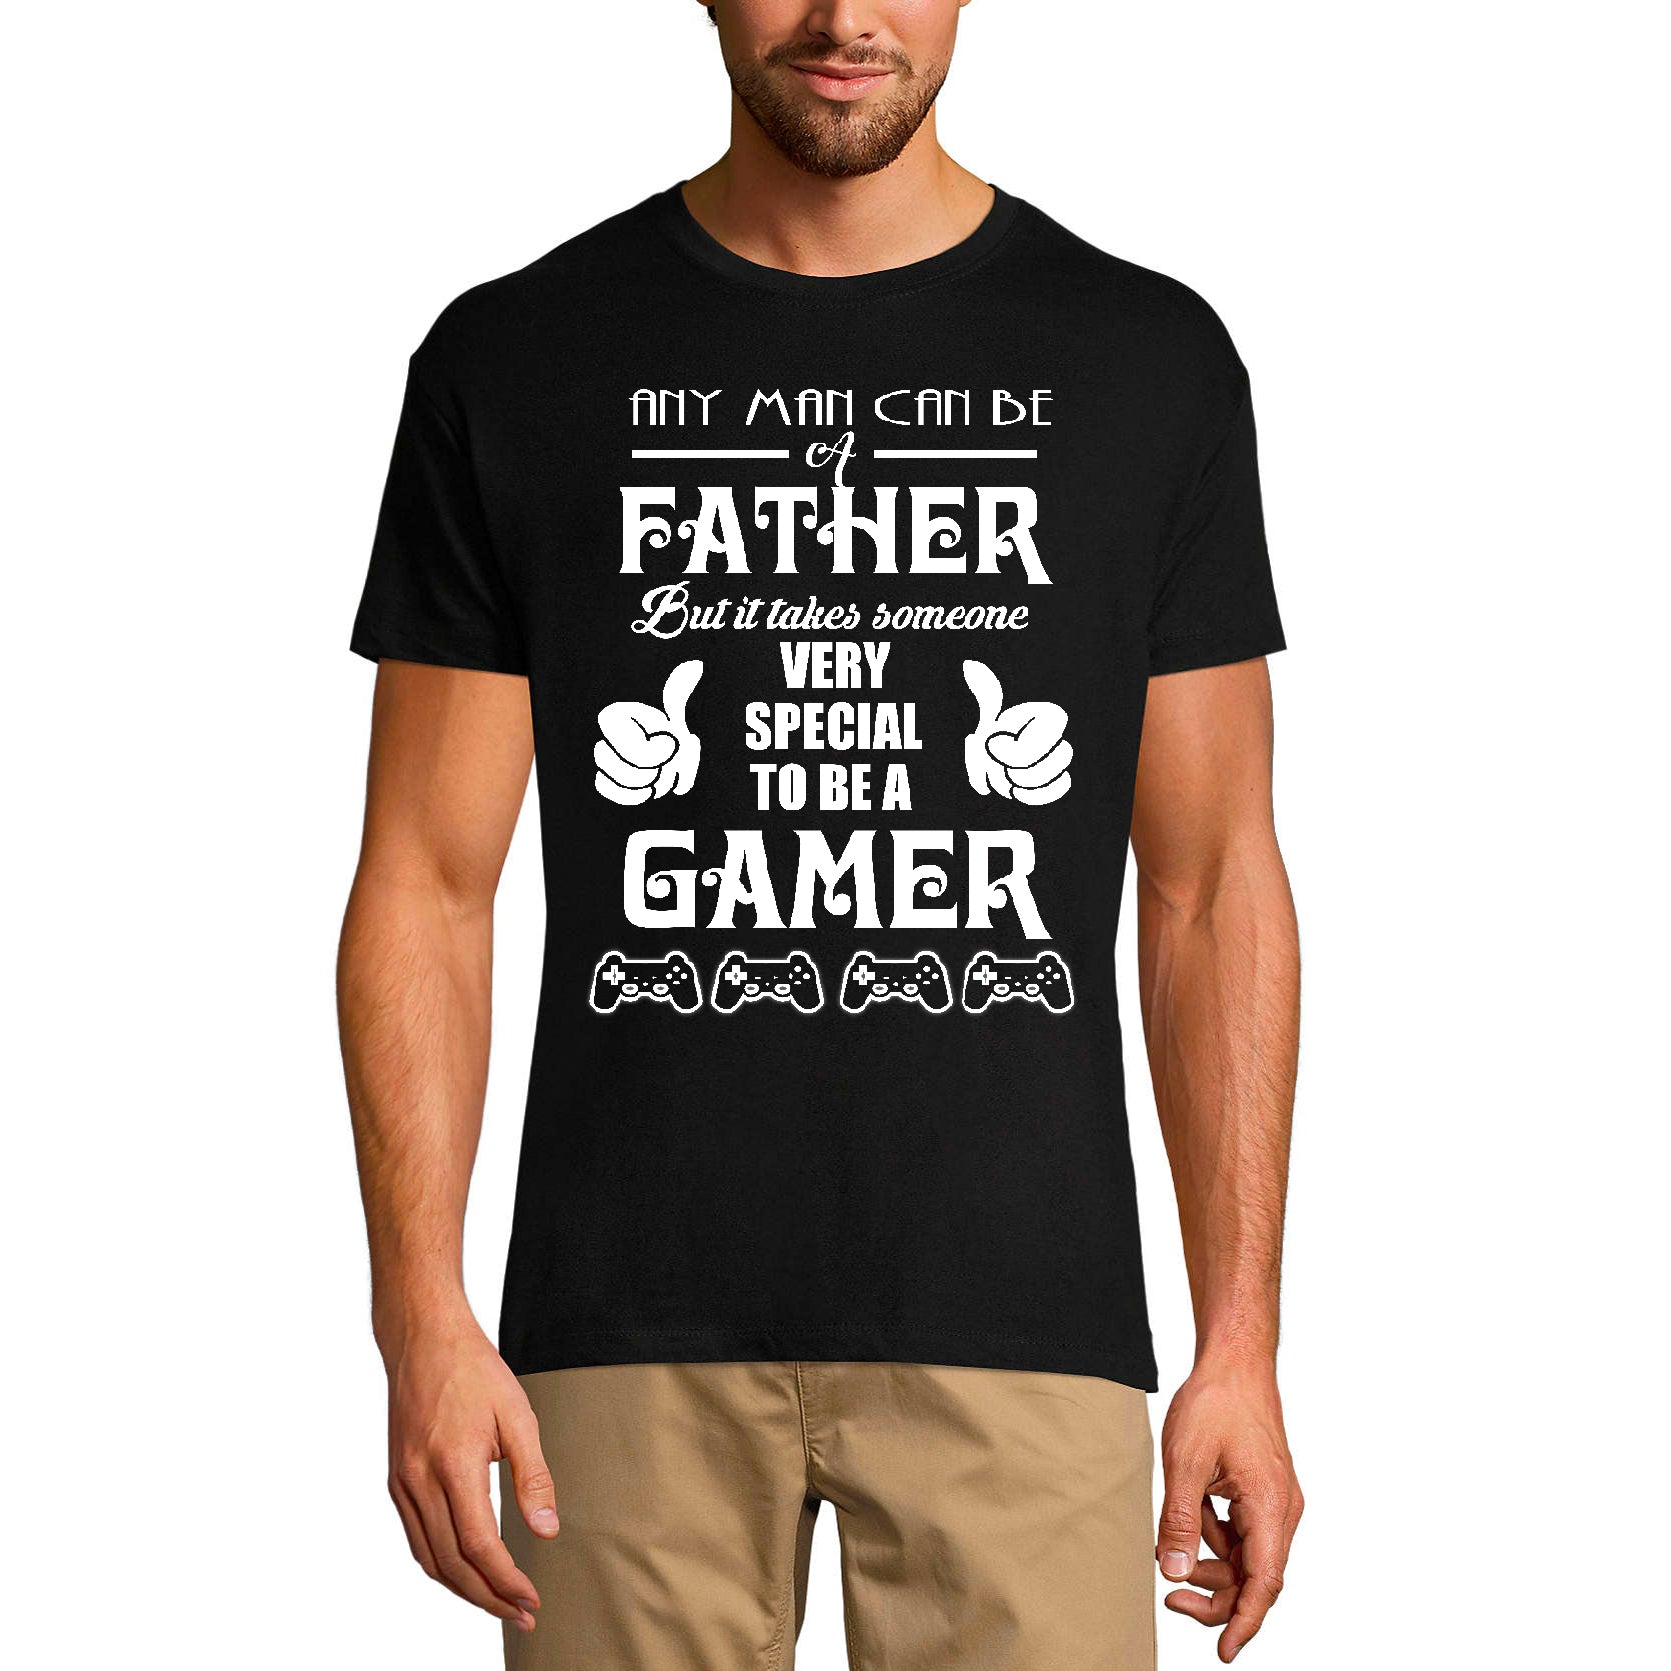 ULTRABASIC Men's T-Shirt Any Man Can Be Father - Dad Gamer - Gift for Father's Day game over dad awesome gamer i paused my game alien player ufo playstation tee shirt clothes gaming apparel gifts super mario nintendo call of duty bros graphic tshirt video game funny geek gift for the gamer fortnite pubg humor son father birthday